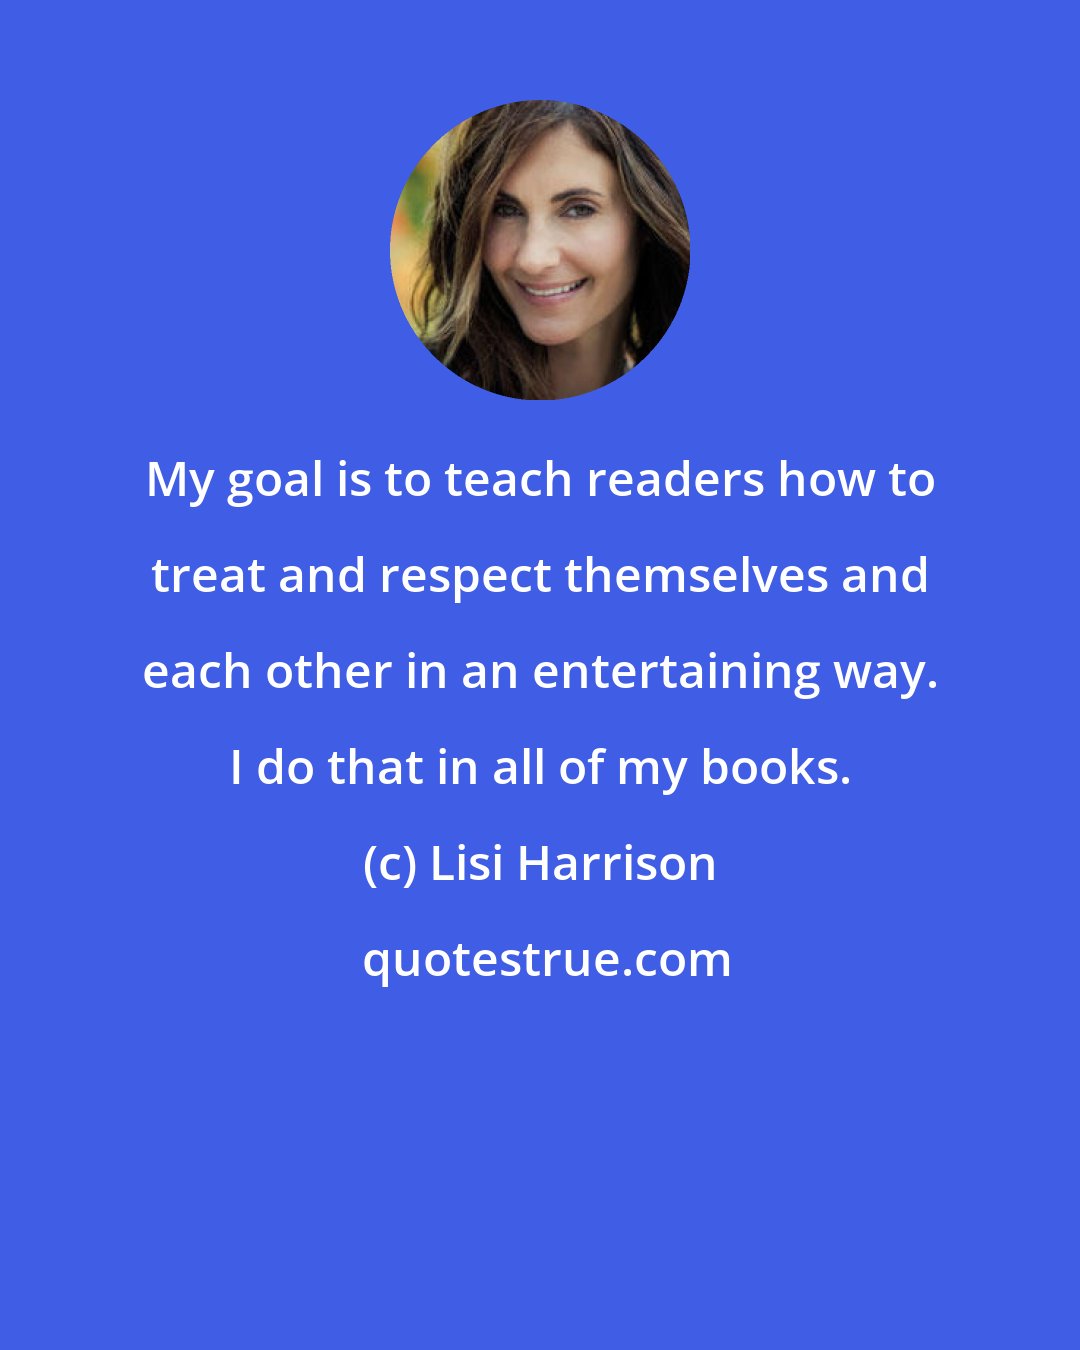 Lisi Harrison: My goal is to teach readers how to treat and respect themselves and each other in an entertaining way. I do that in all of my books.